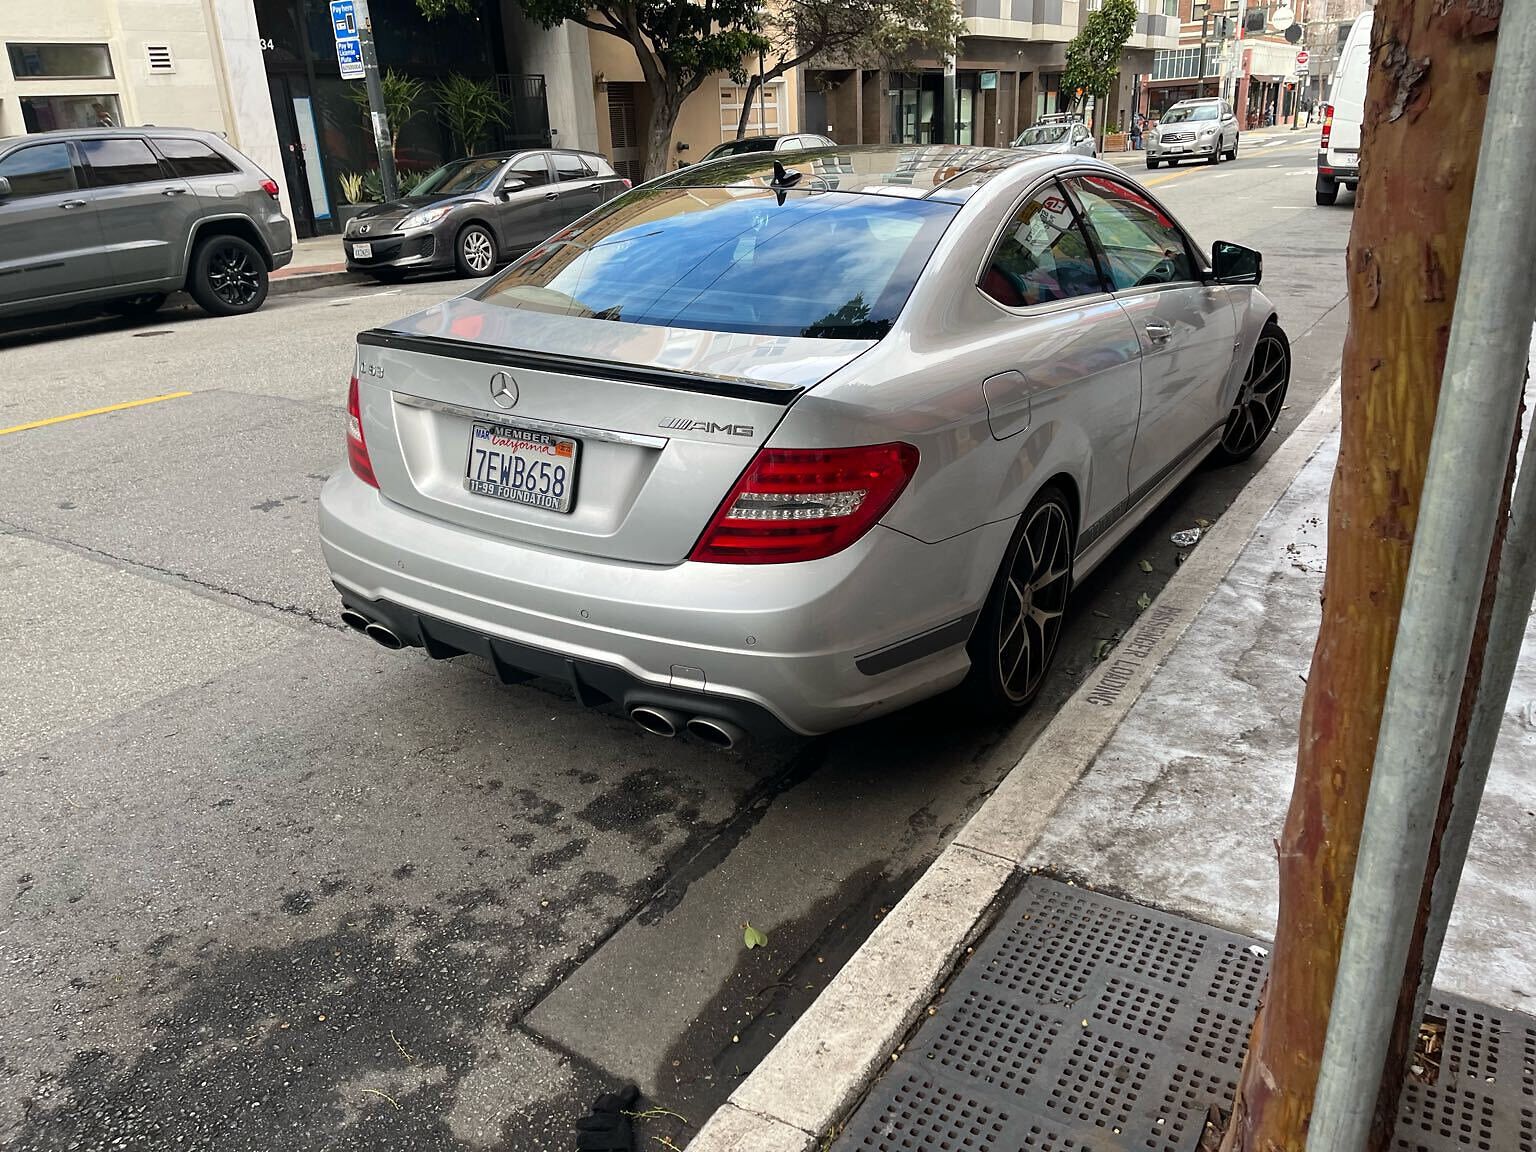 Photo of car in the street with license plate 7EWB658 in California